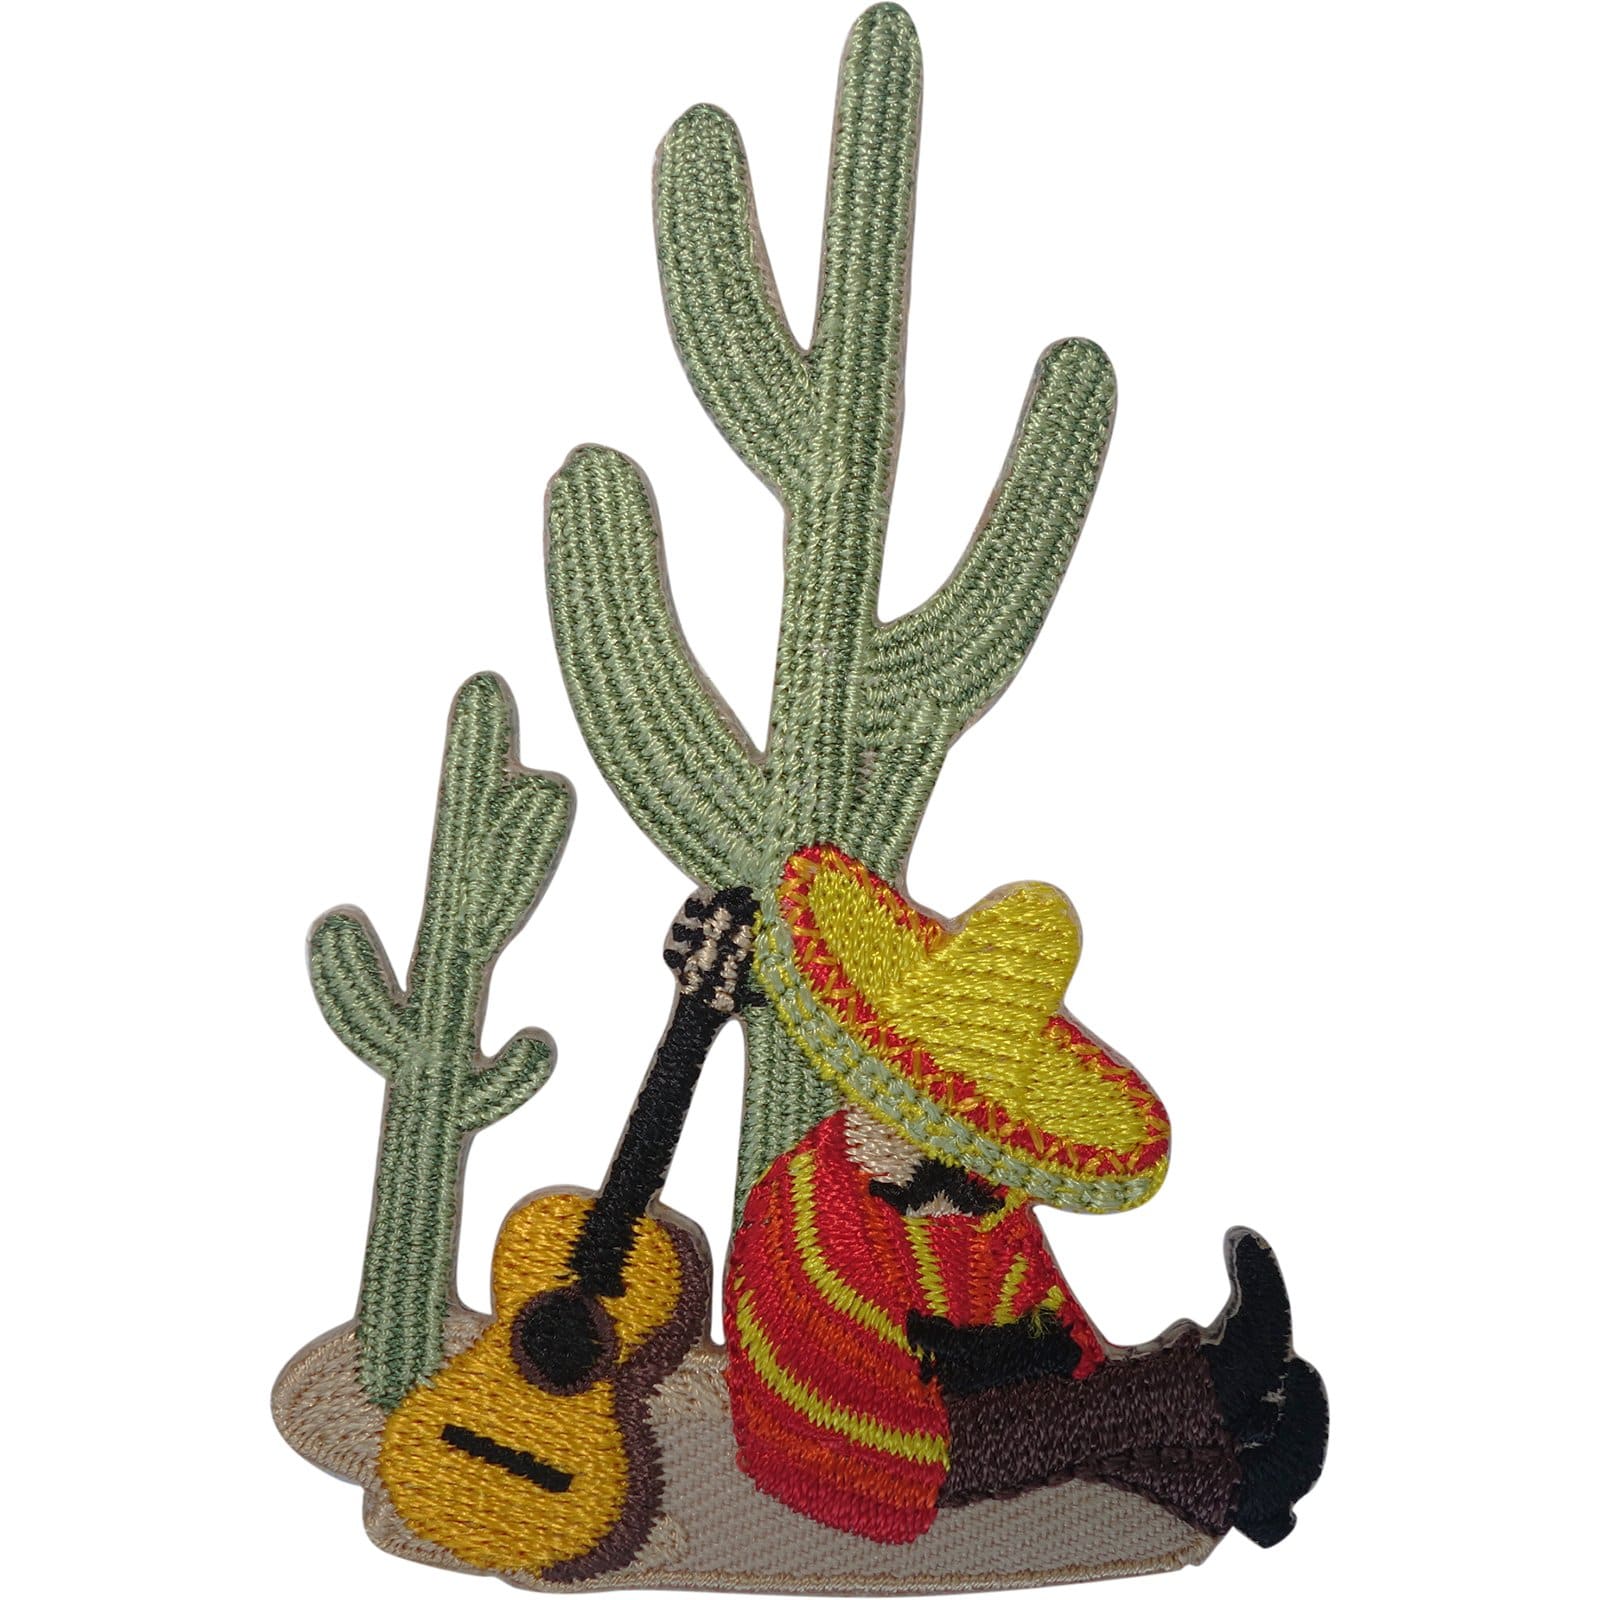 Mexican Sombrero Hat Cactus Guitar Patch Embroidered Badge Iron Sew On Clothes